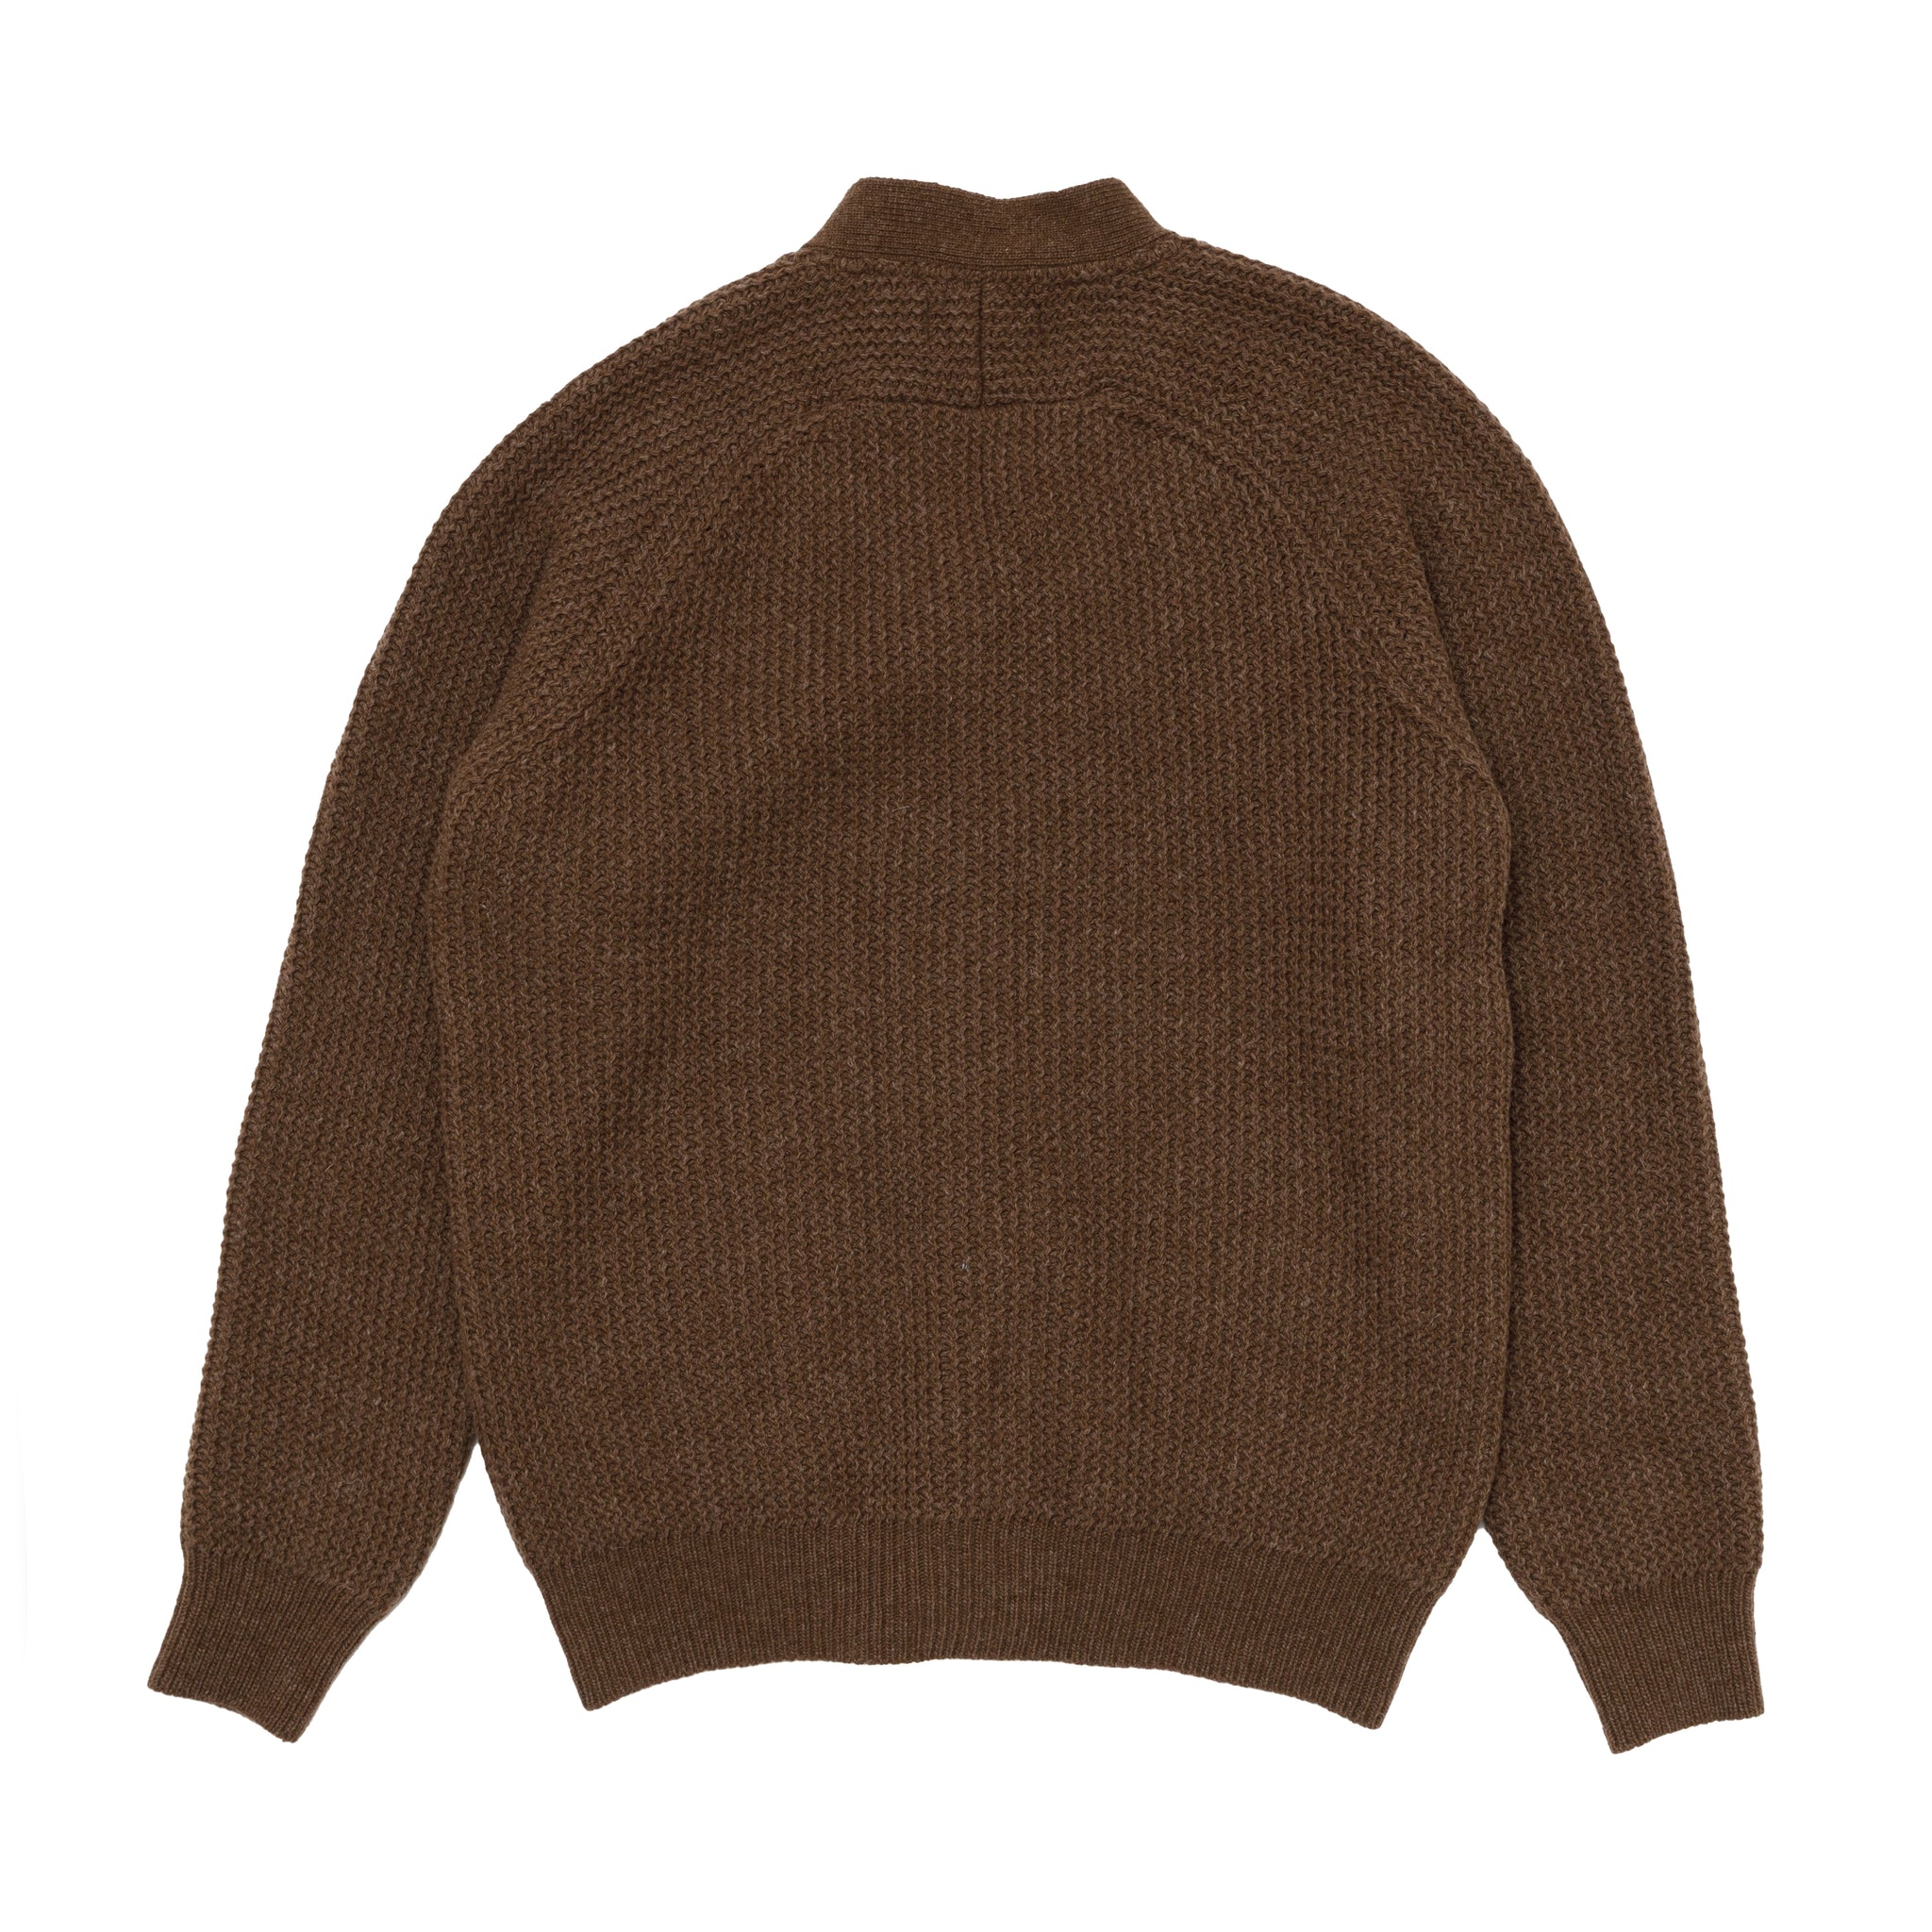 Vince Cardigan in Light Brown Rack Stitch Knit